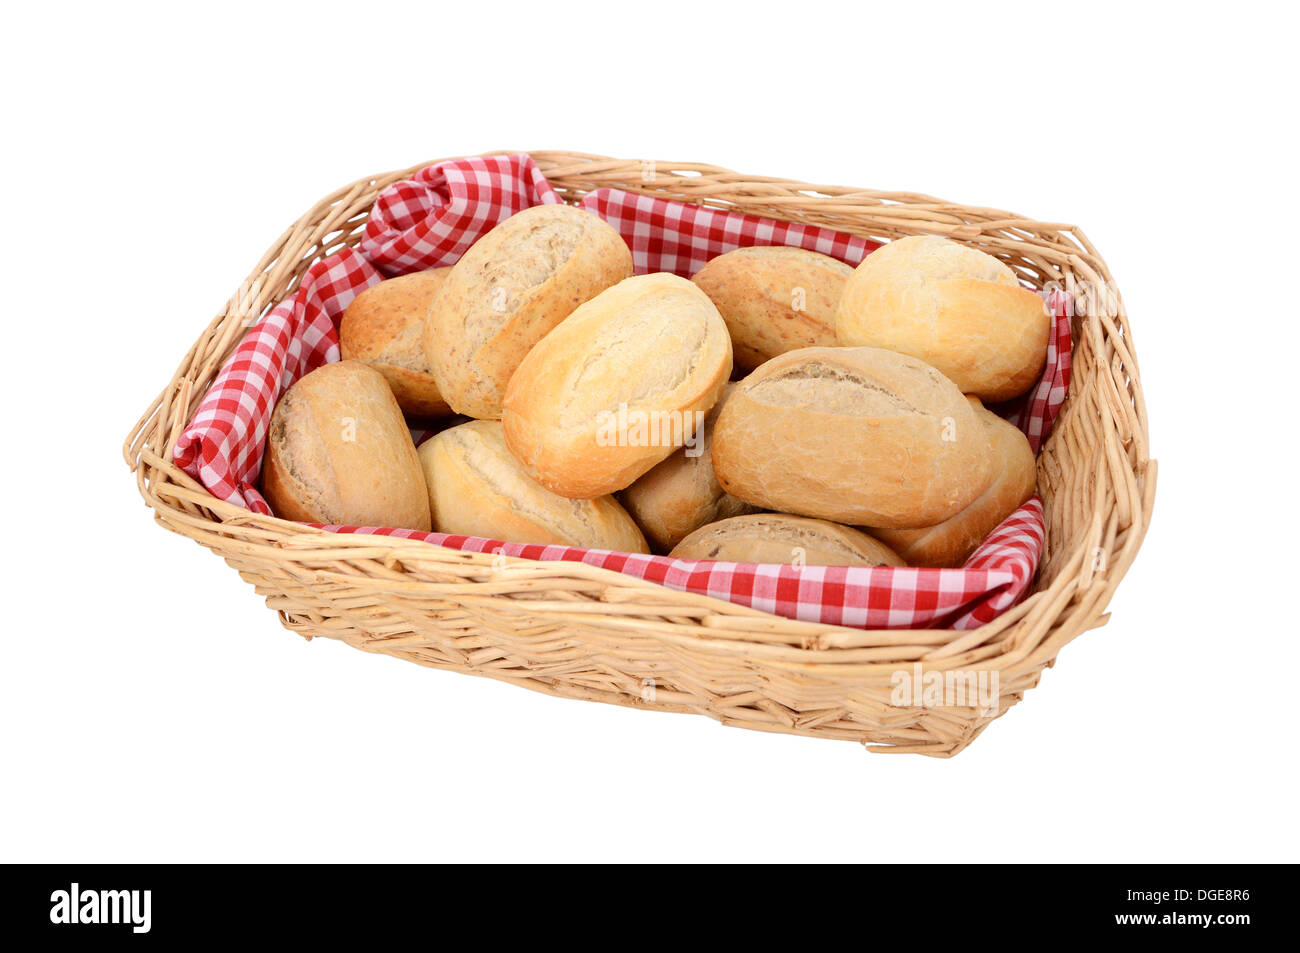 Basket of freshly baked bread rolls, isolated on a white background Stock Photo